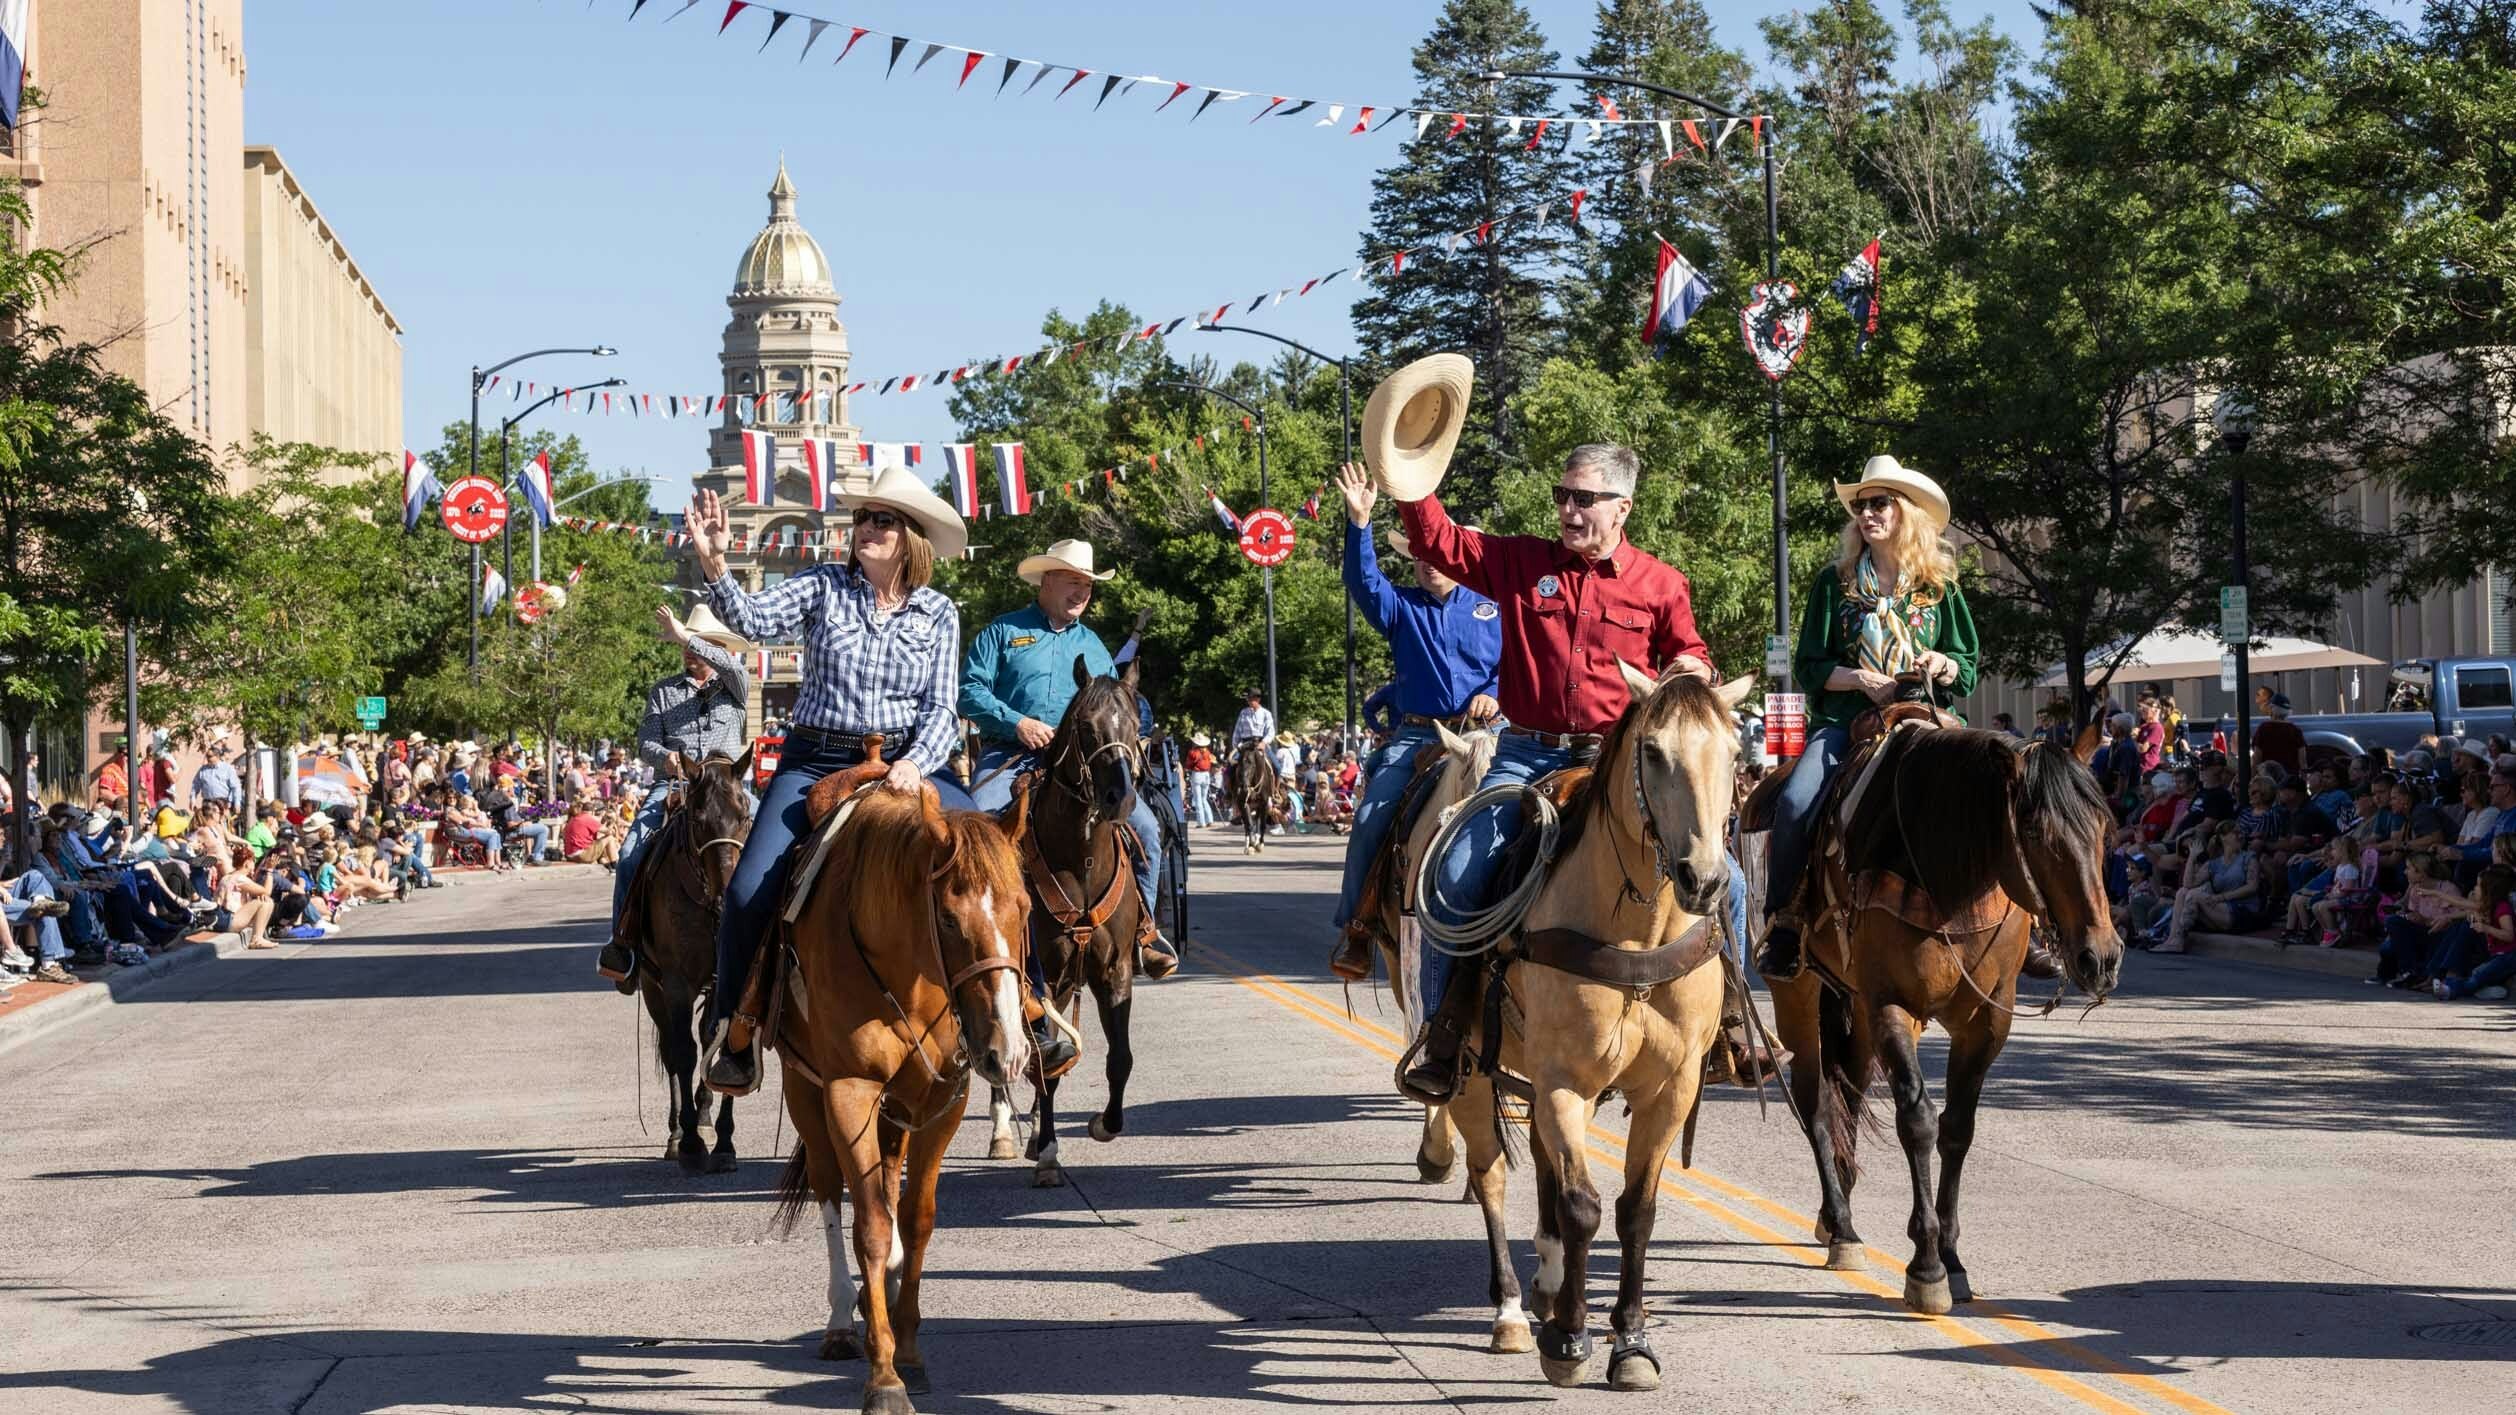 Caption for photo below — Wyoming Governor Mark Gordon and First Lady of Wyoming Jennie Gordon in the parade at Cheyenne Frontier Days on July 23, 2023 in downtown Cheyenne.